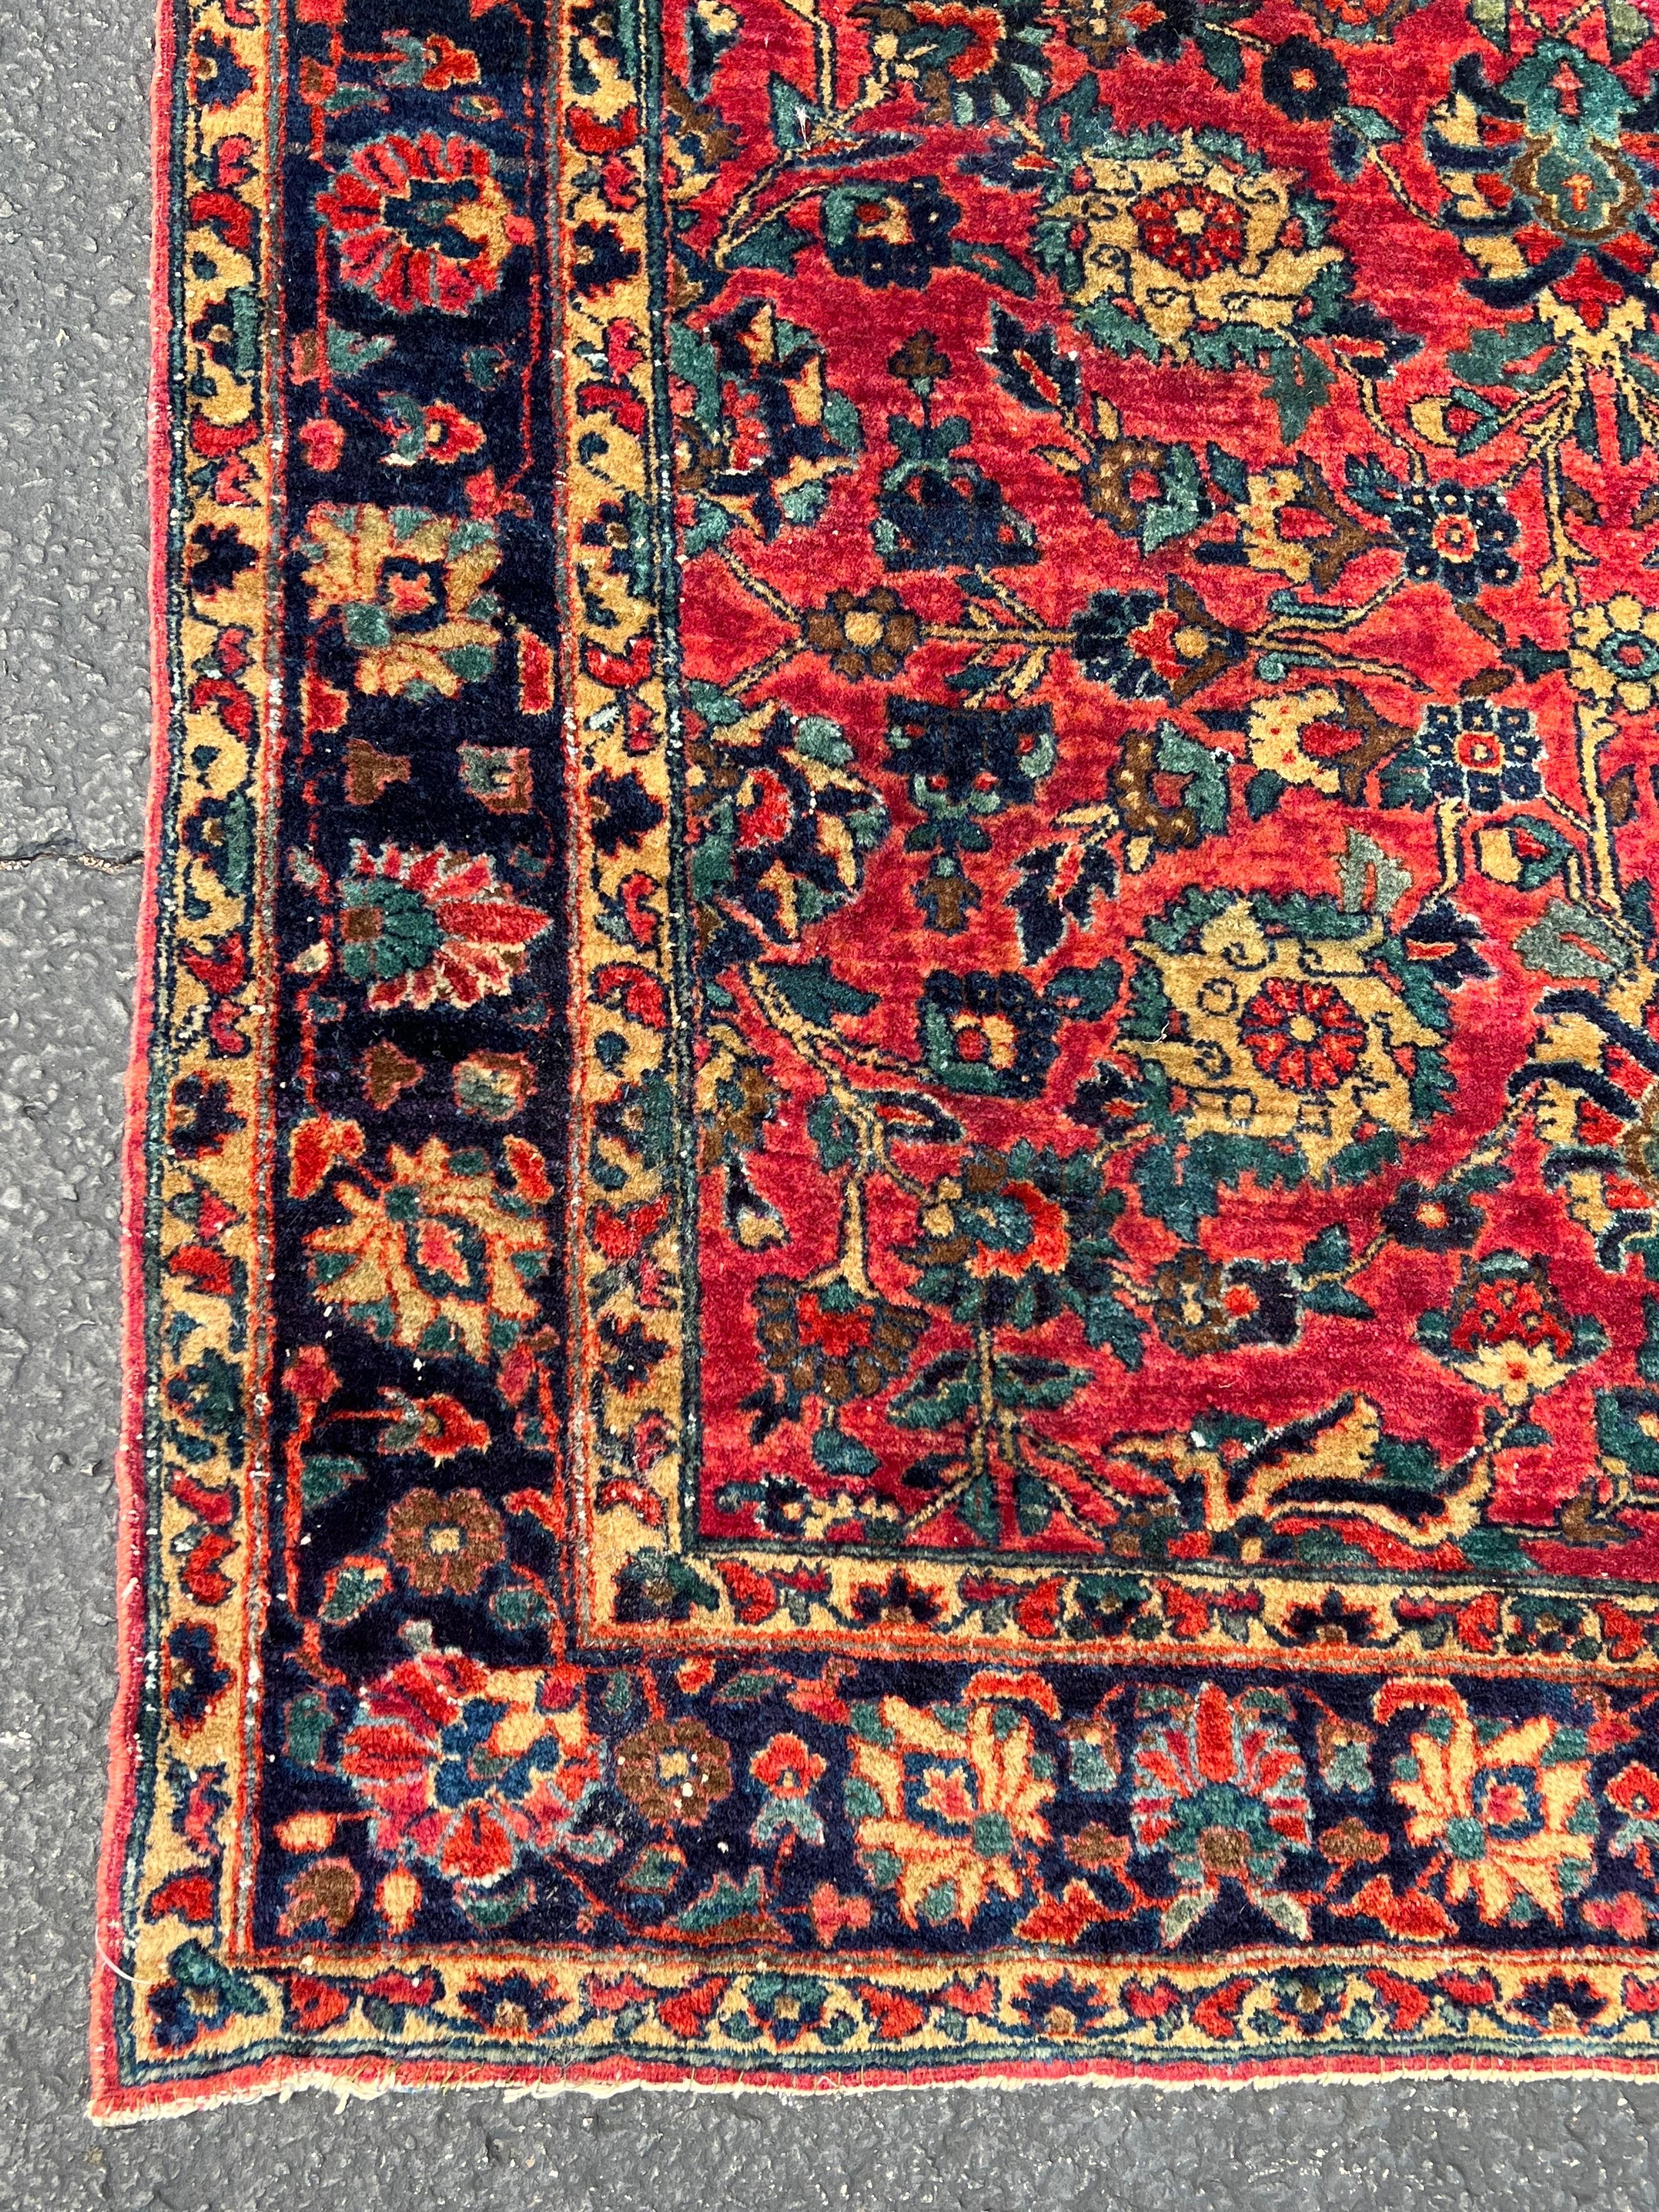 Vegetable Dyed Mid 20th Century Persian Rug 5' x 7' For Sale 9